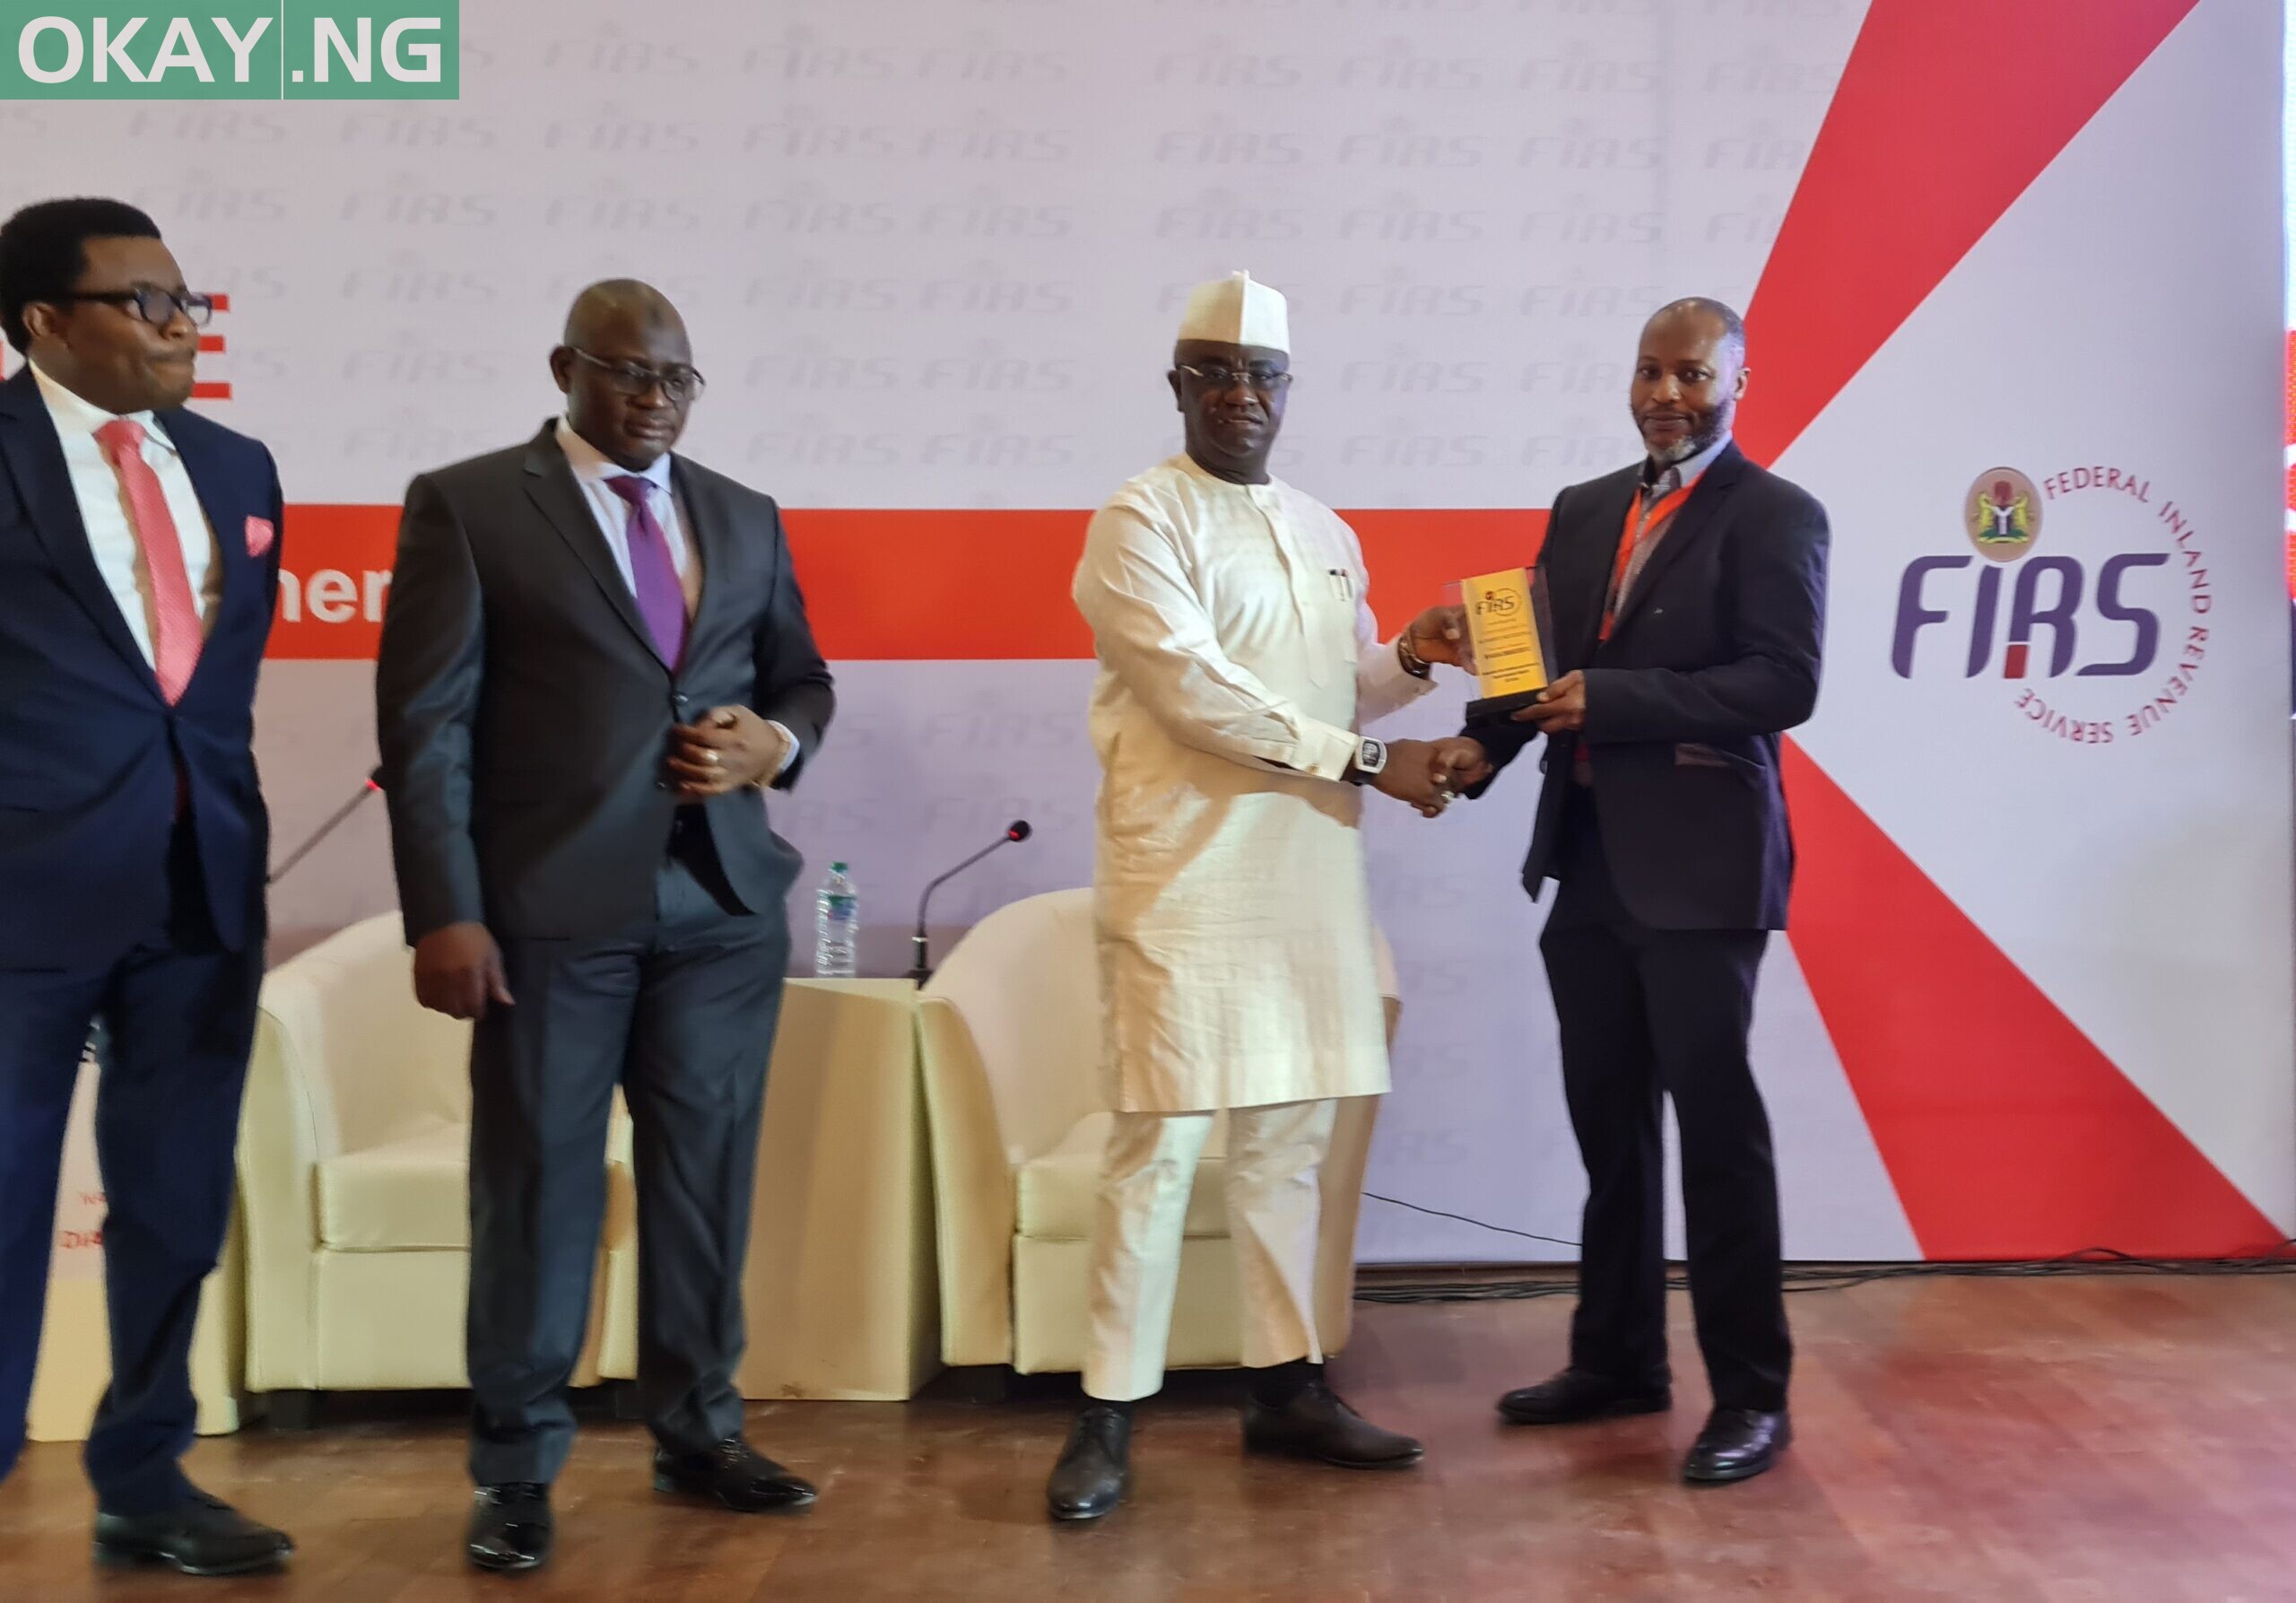 L-R: 3. Hon. Chike Okafor, representing the House Committee Chairman on Finance; Chairman FIRS, Muhammad Nami, and Prince Clement Agba Minister of State Budget and National Planning presenting the Awards to Modupe Kadri, Chief Financial Officer, MTN Nigeria at National Tax Dialogue Event held at the Banquet Hall, State House Presidential Villa Abuja on Tuesday, March 29, 2022.